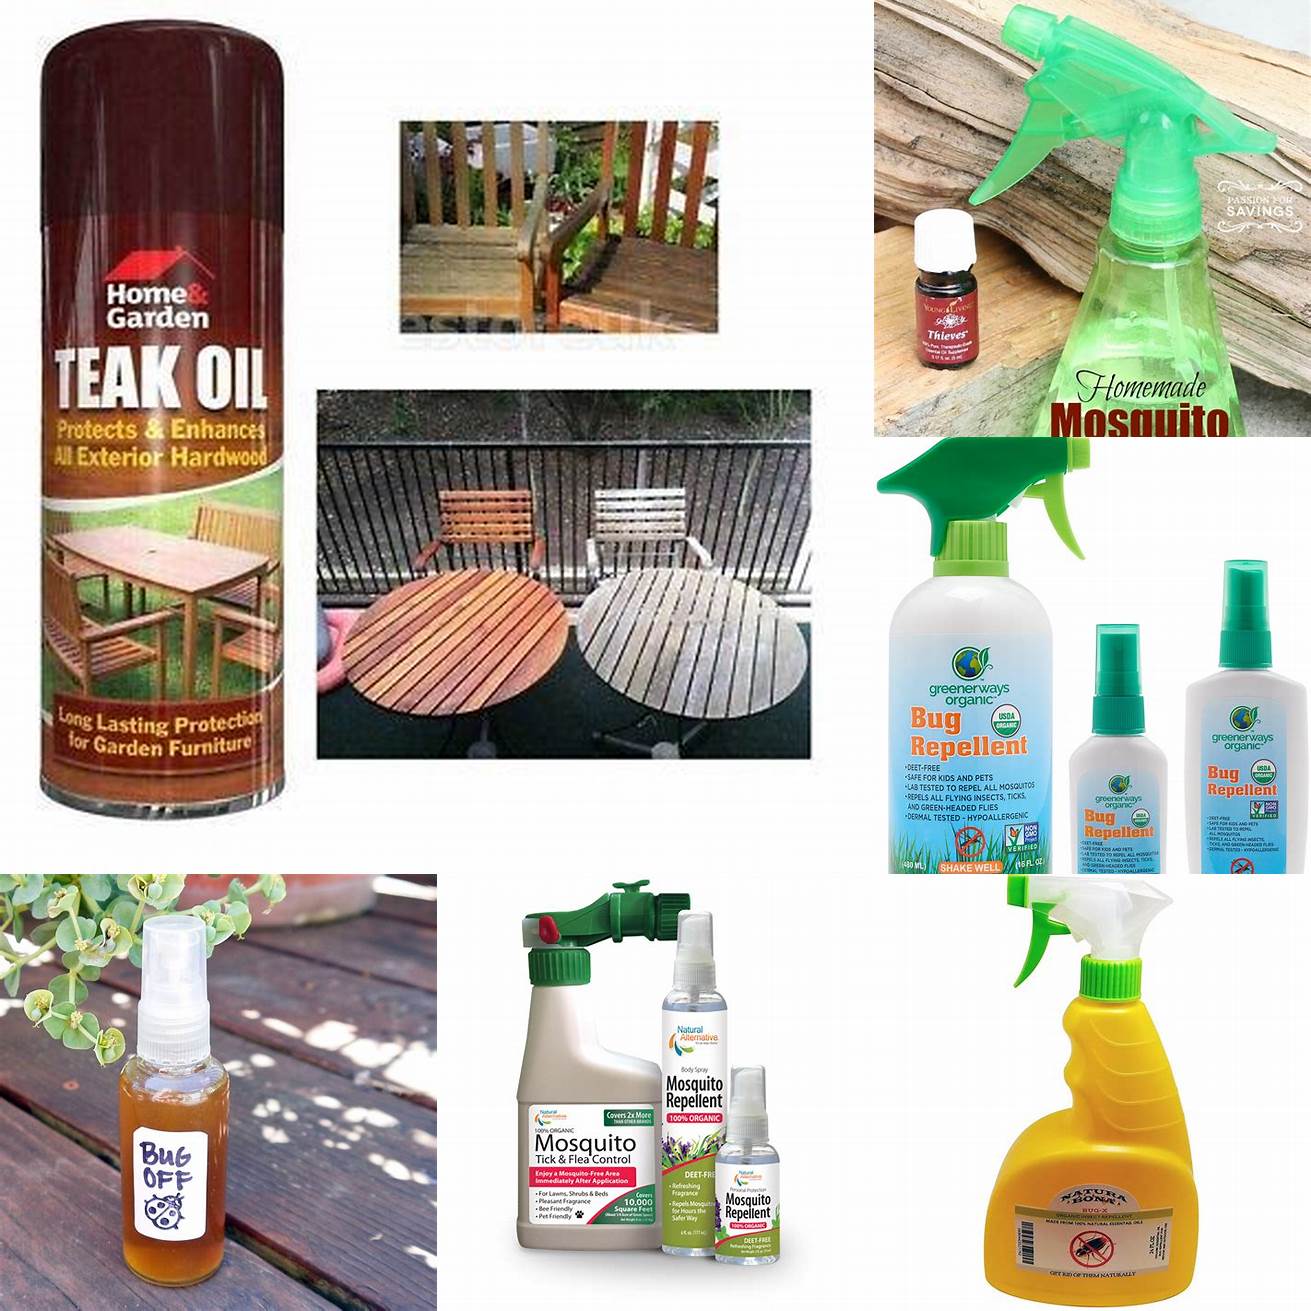 Natural Insect Repellent Sprayed on Teak Furniture